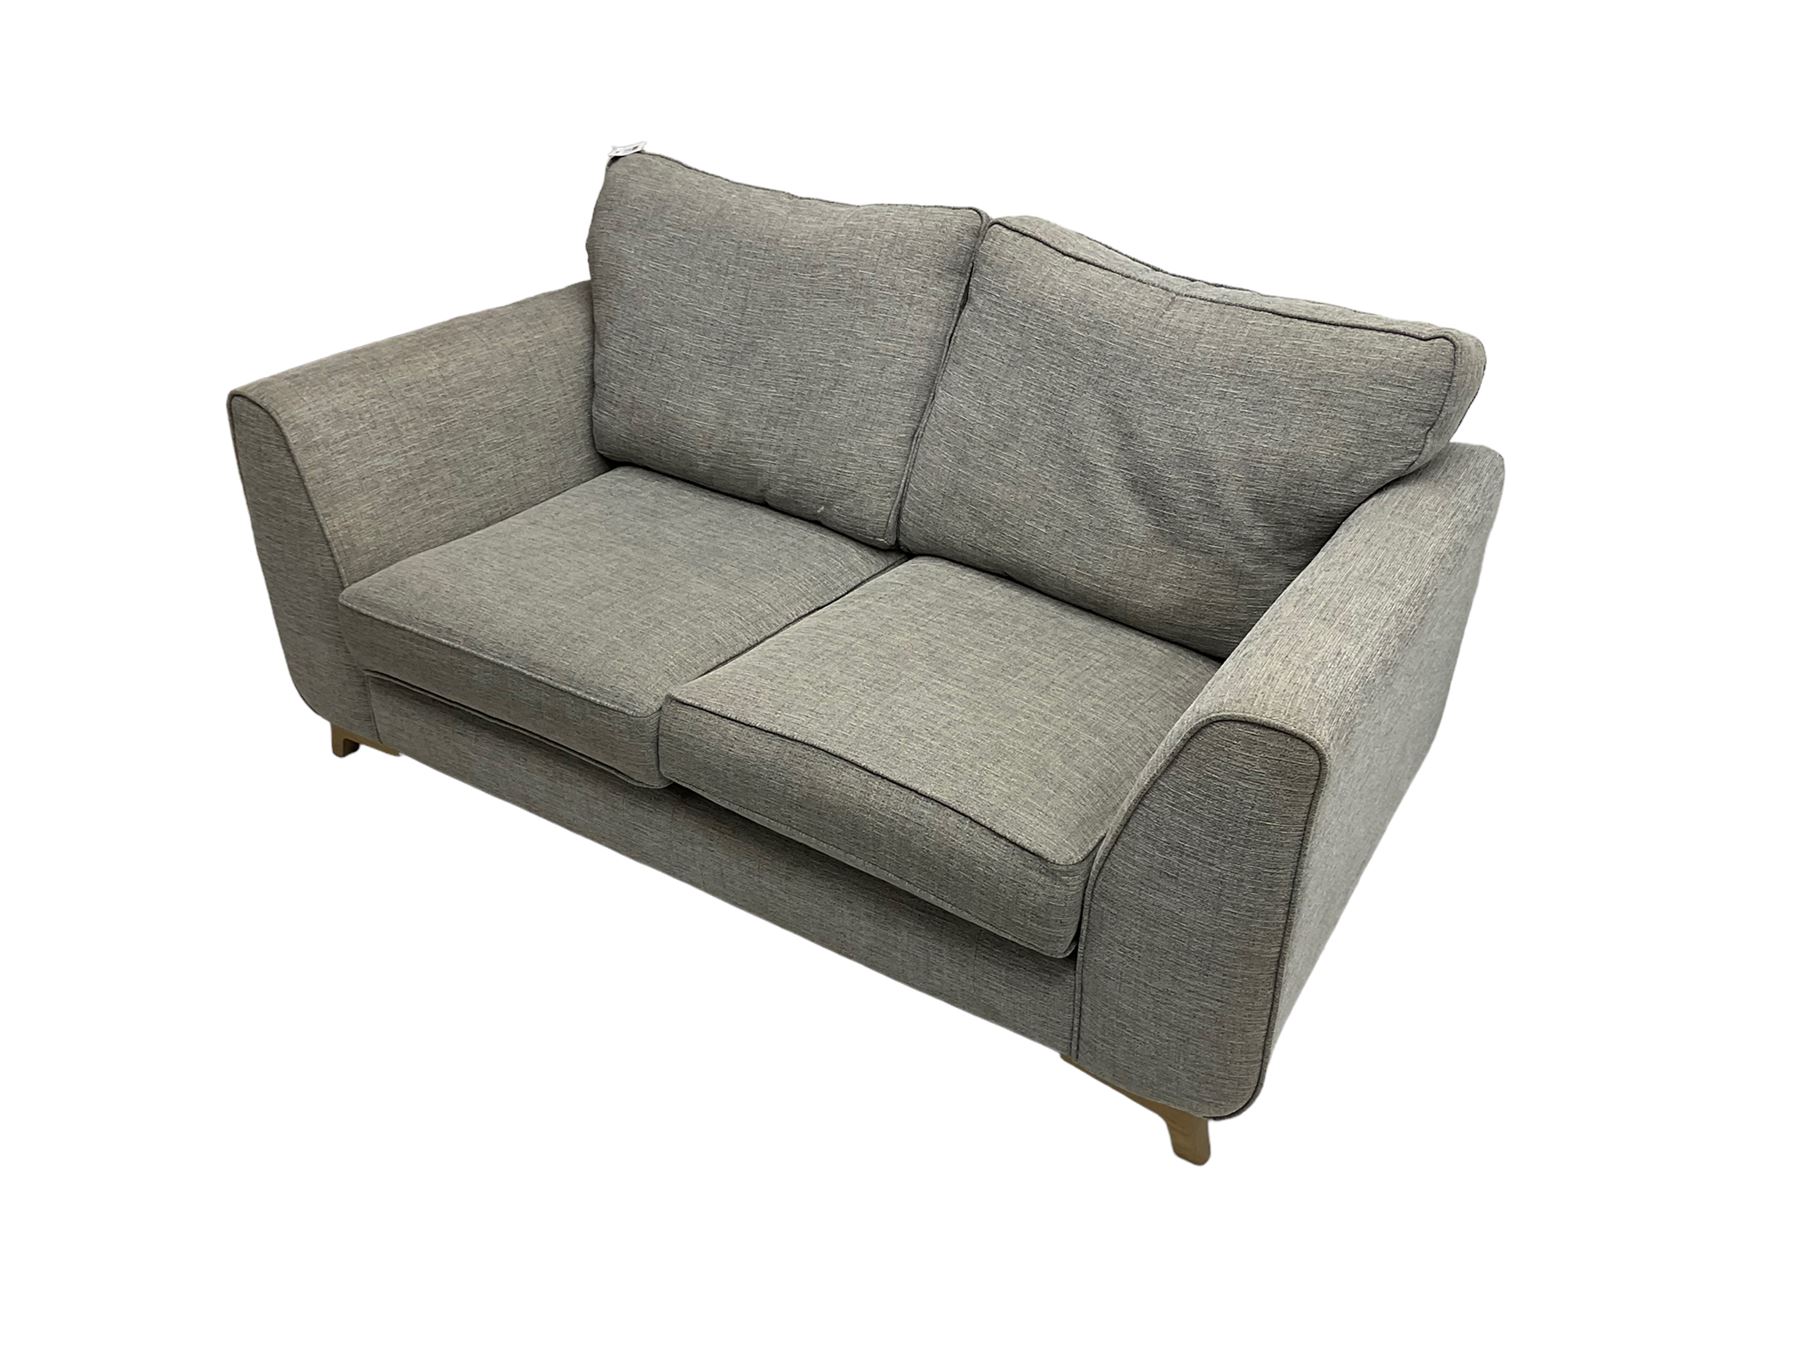 Two seat sofa upholstered in graphite grey fabric - Image 3 of 7